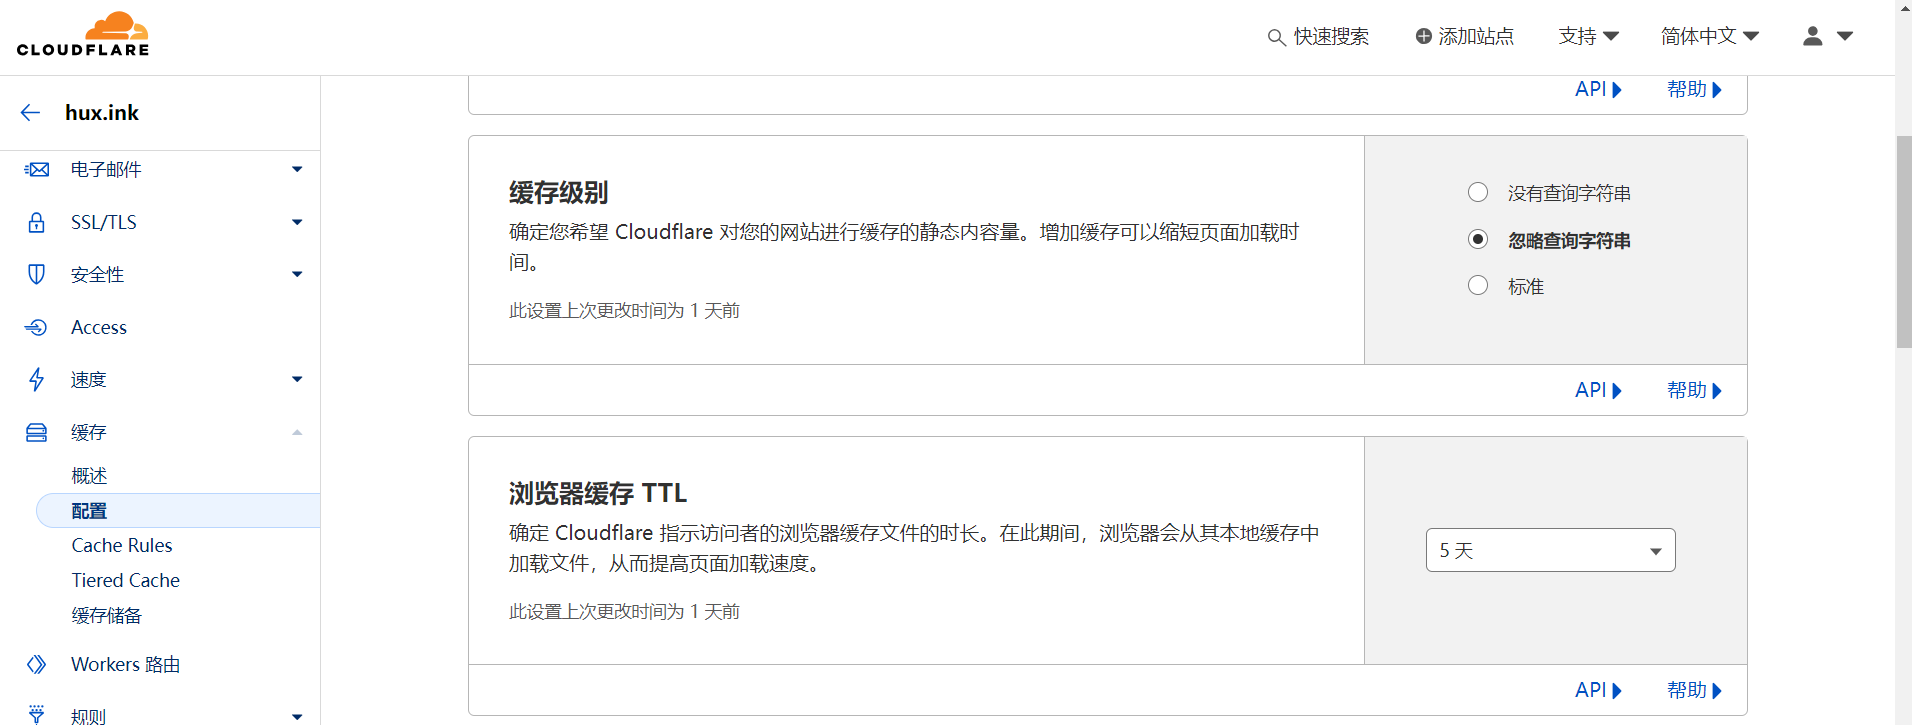 cloudflare-06.png